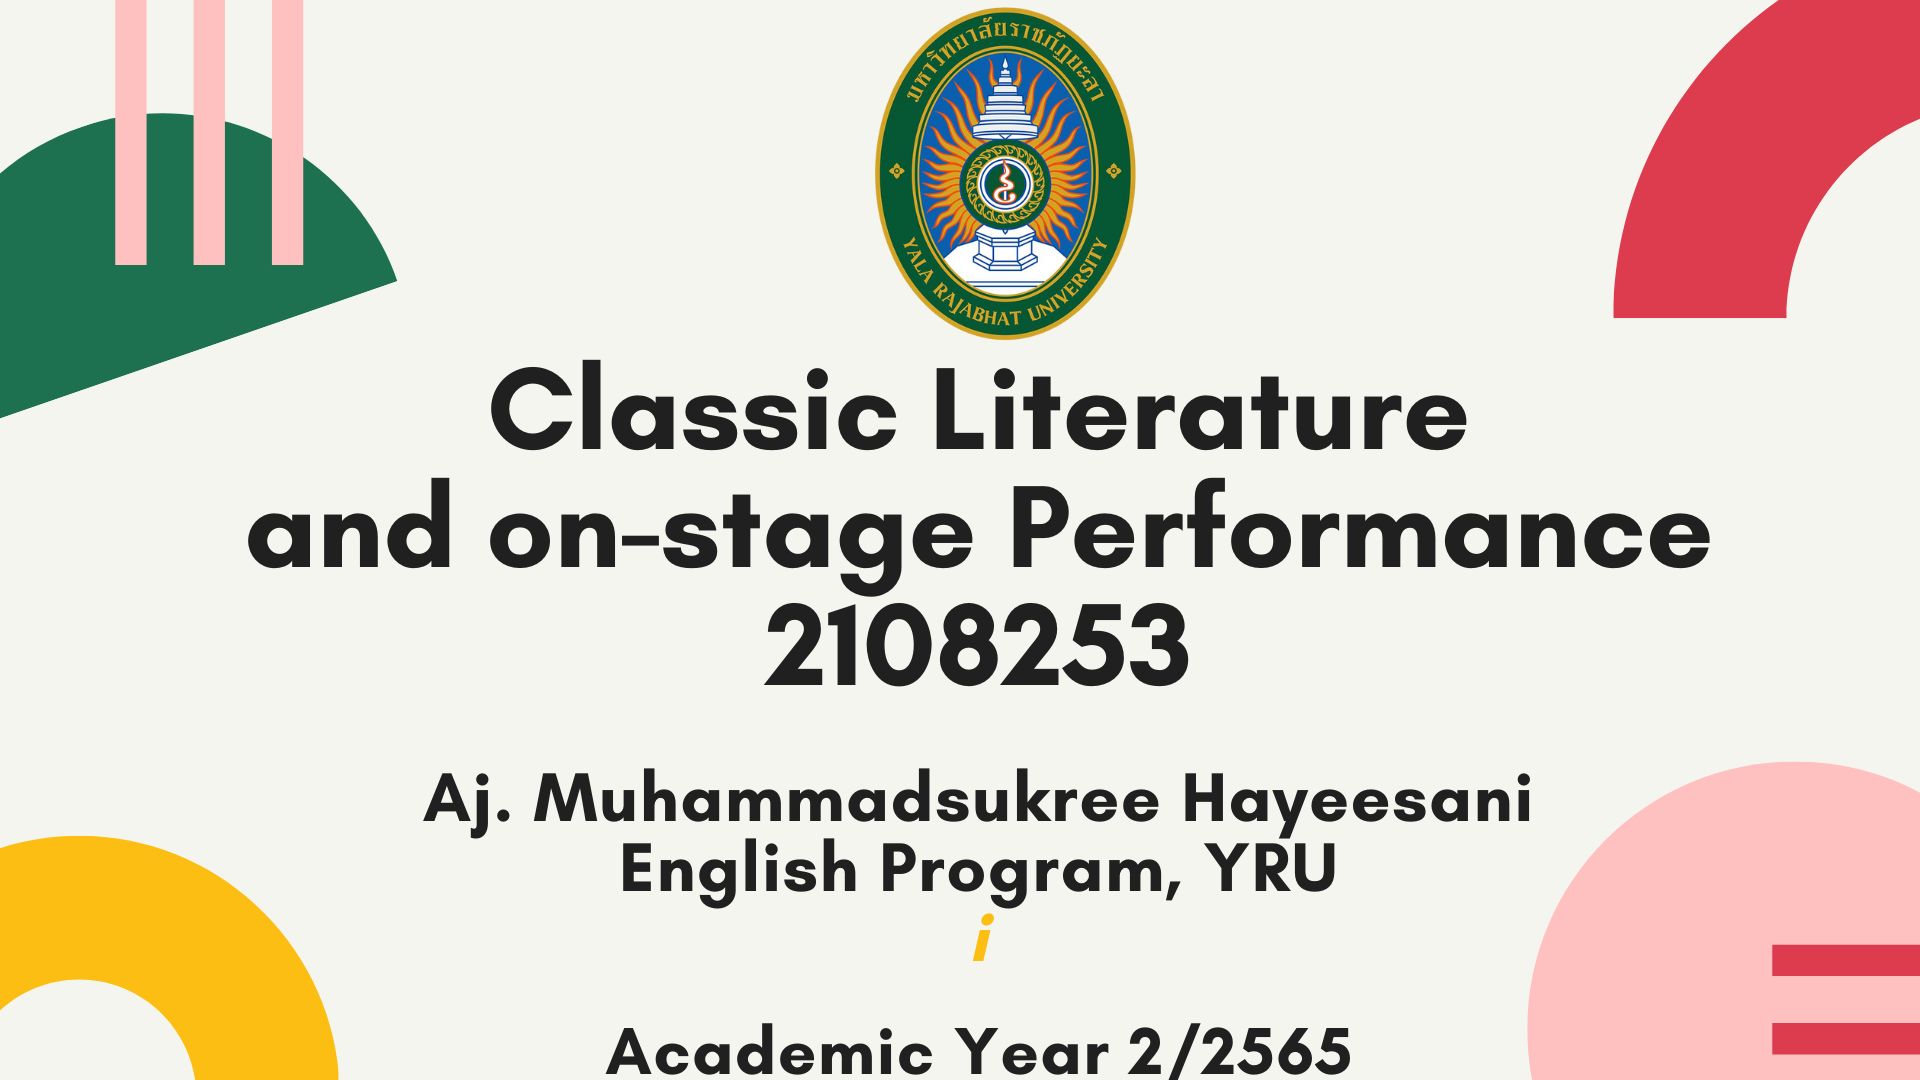 Classic Literature and on-stage Performance